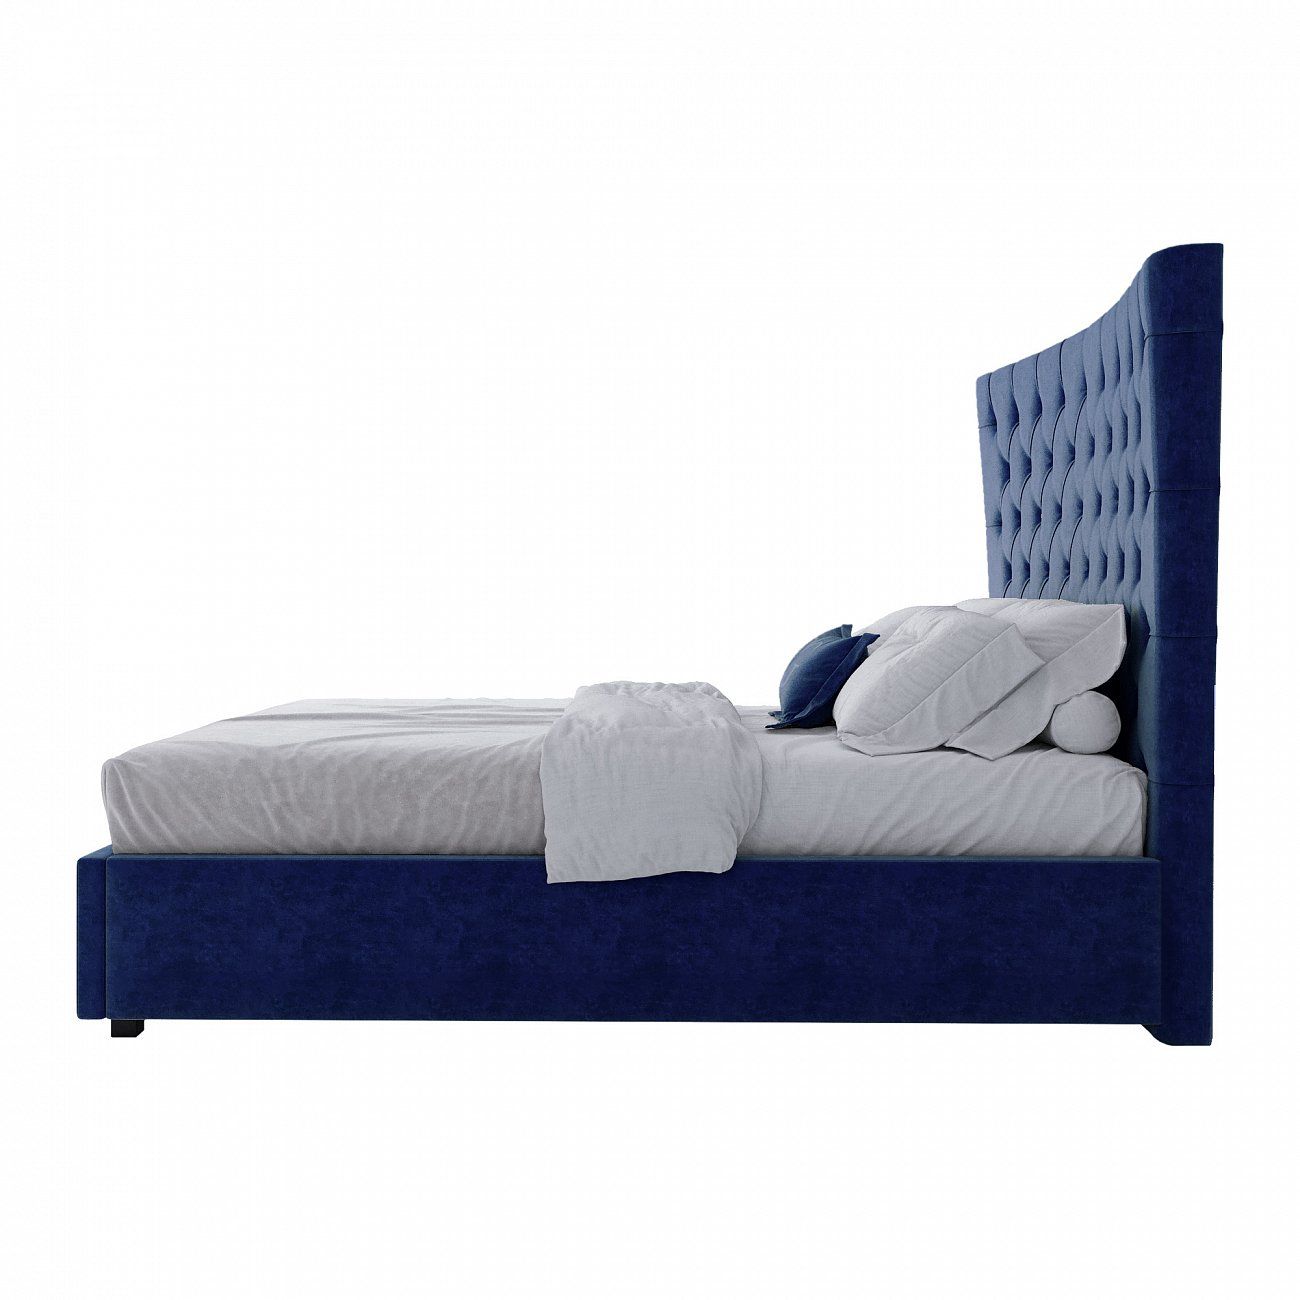 Teenage bed with carriage screed 140x200 blue QuickSand